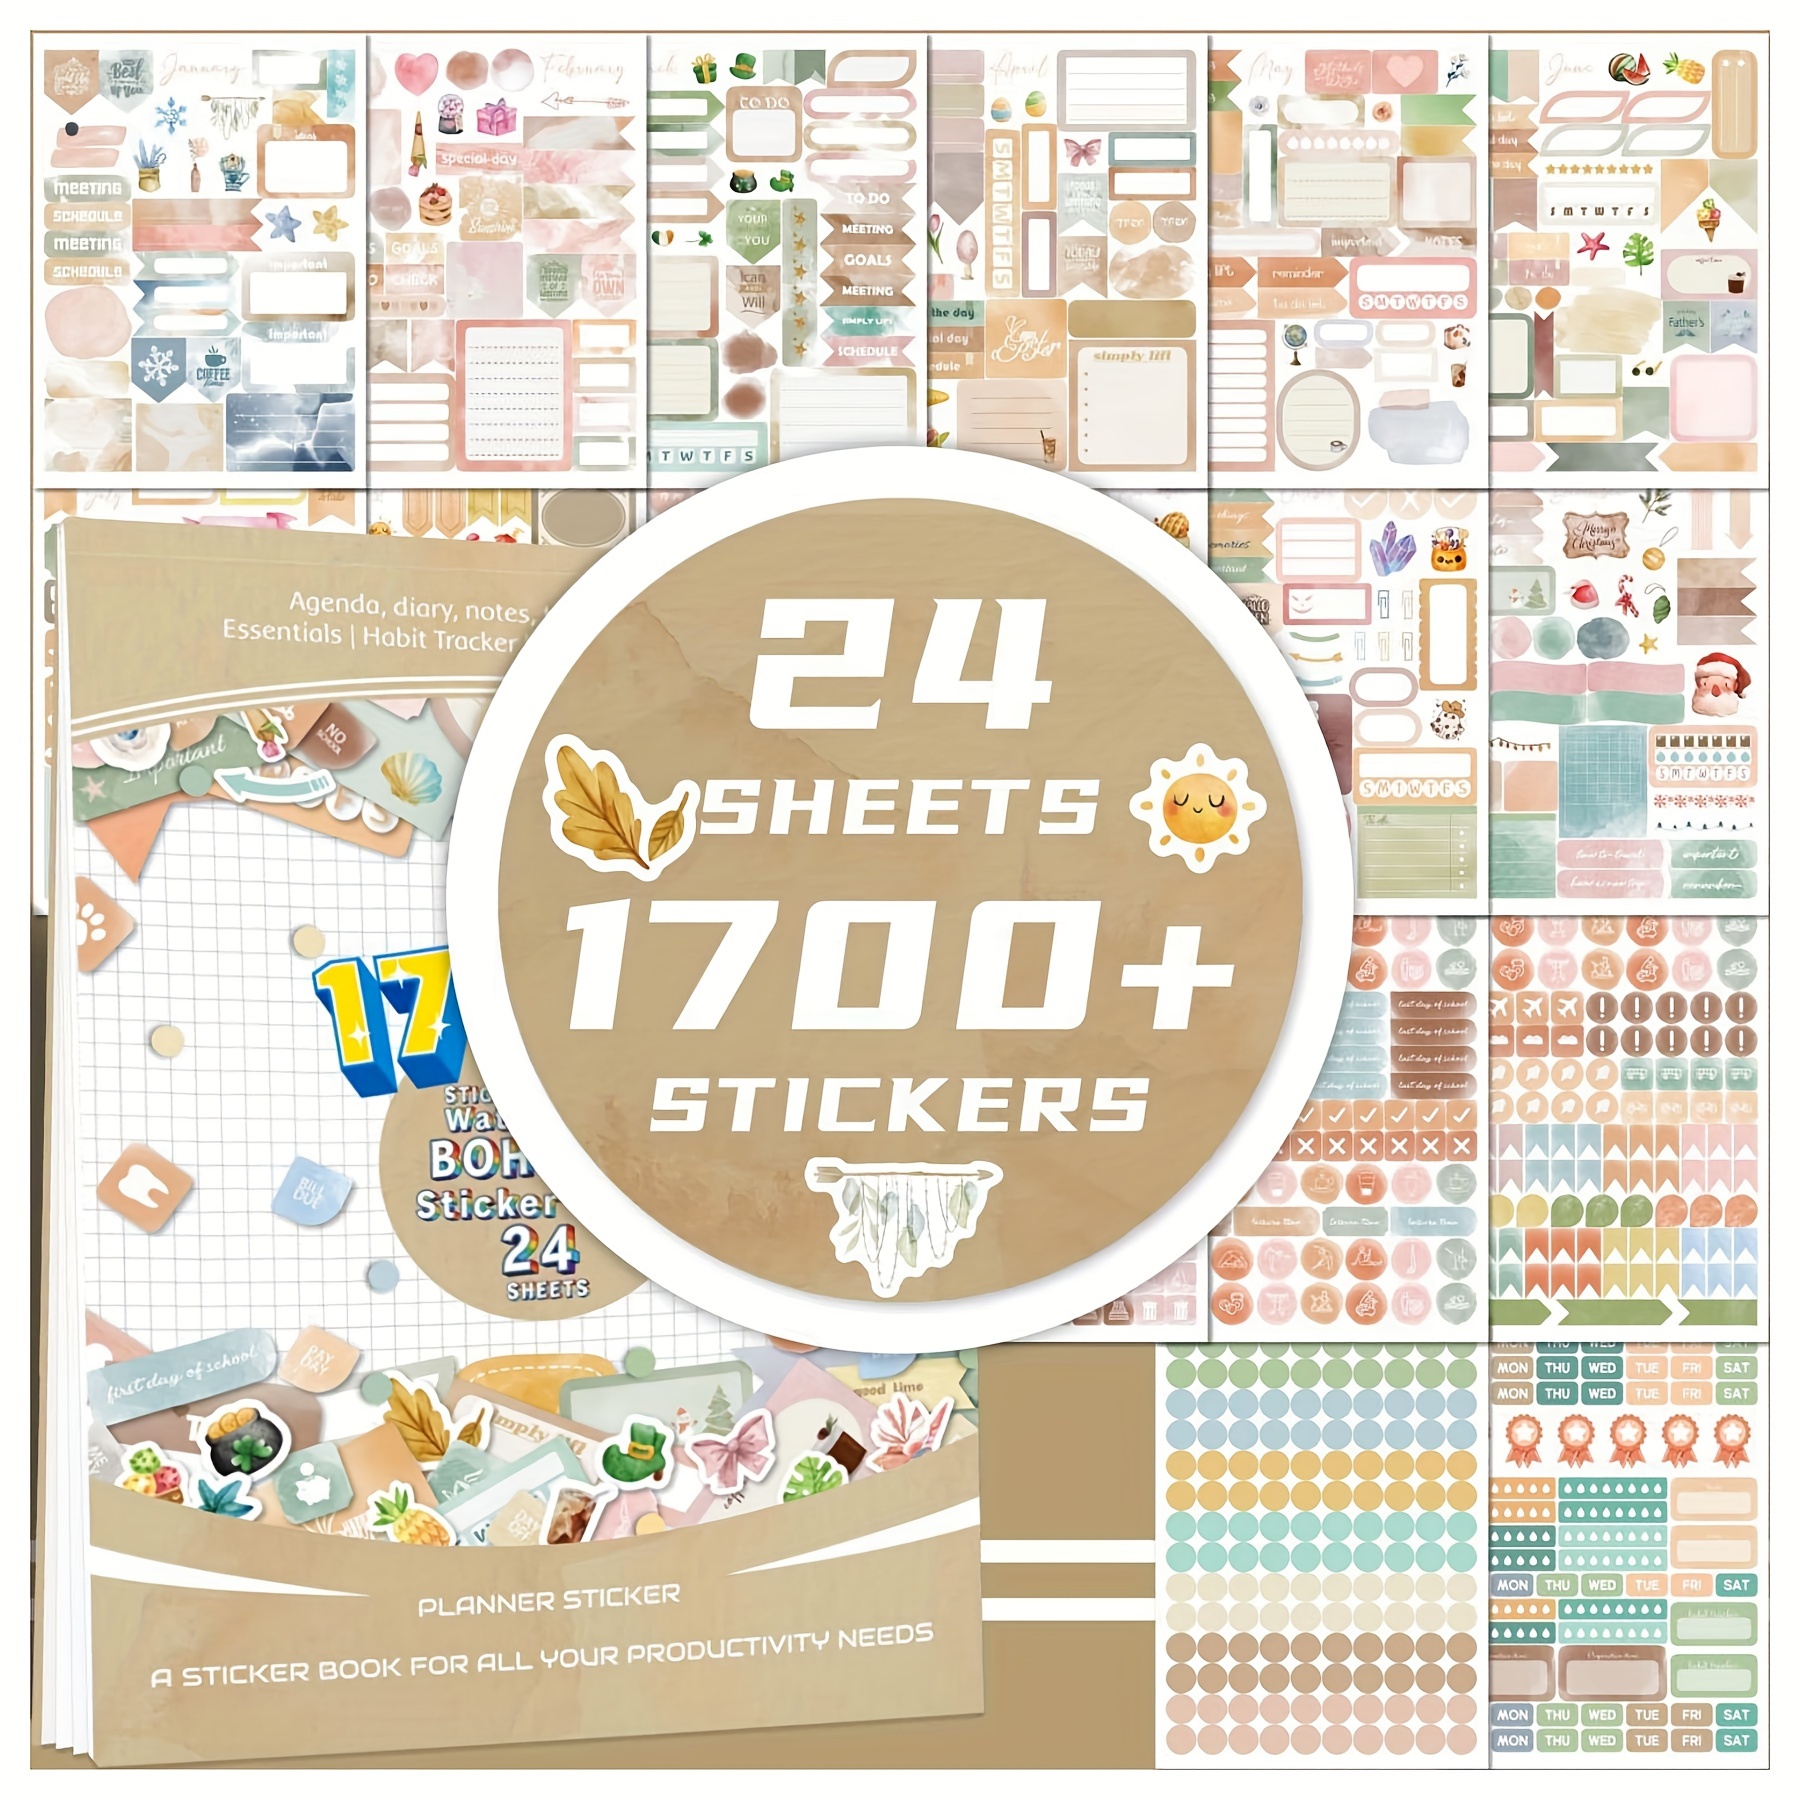 480 Pieces Inspirational Quote Daily Planner Stickers for Women Journaling  Calendar Scrapbook Stickers Aesthetic 24 Sheets Motivational Waterproof